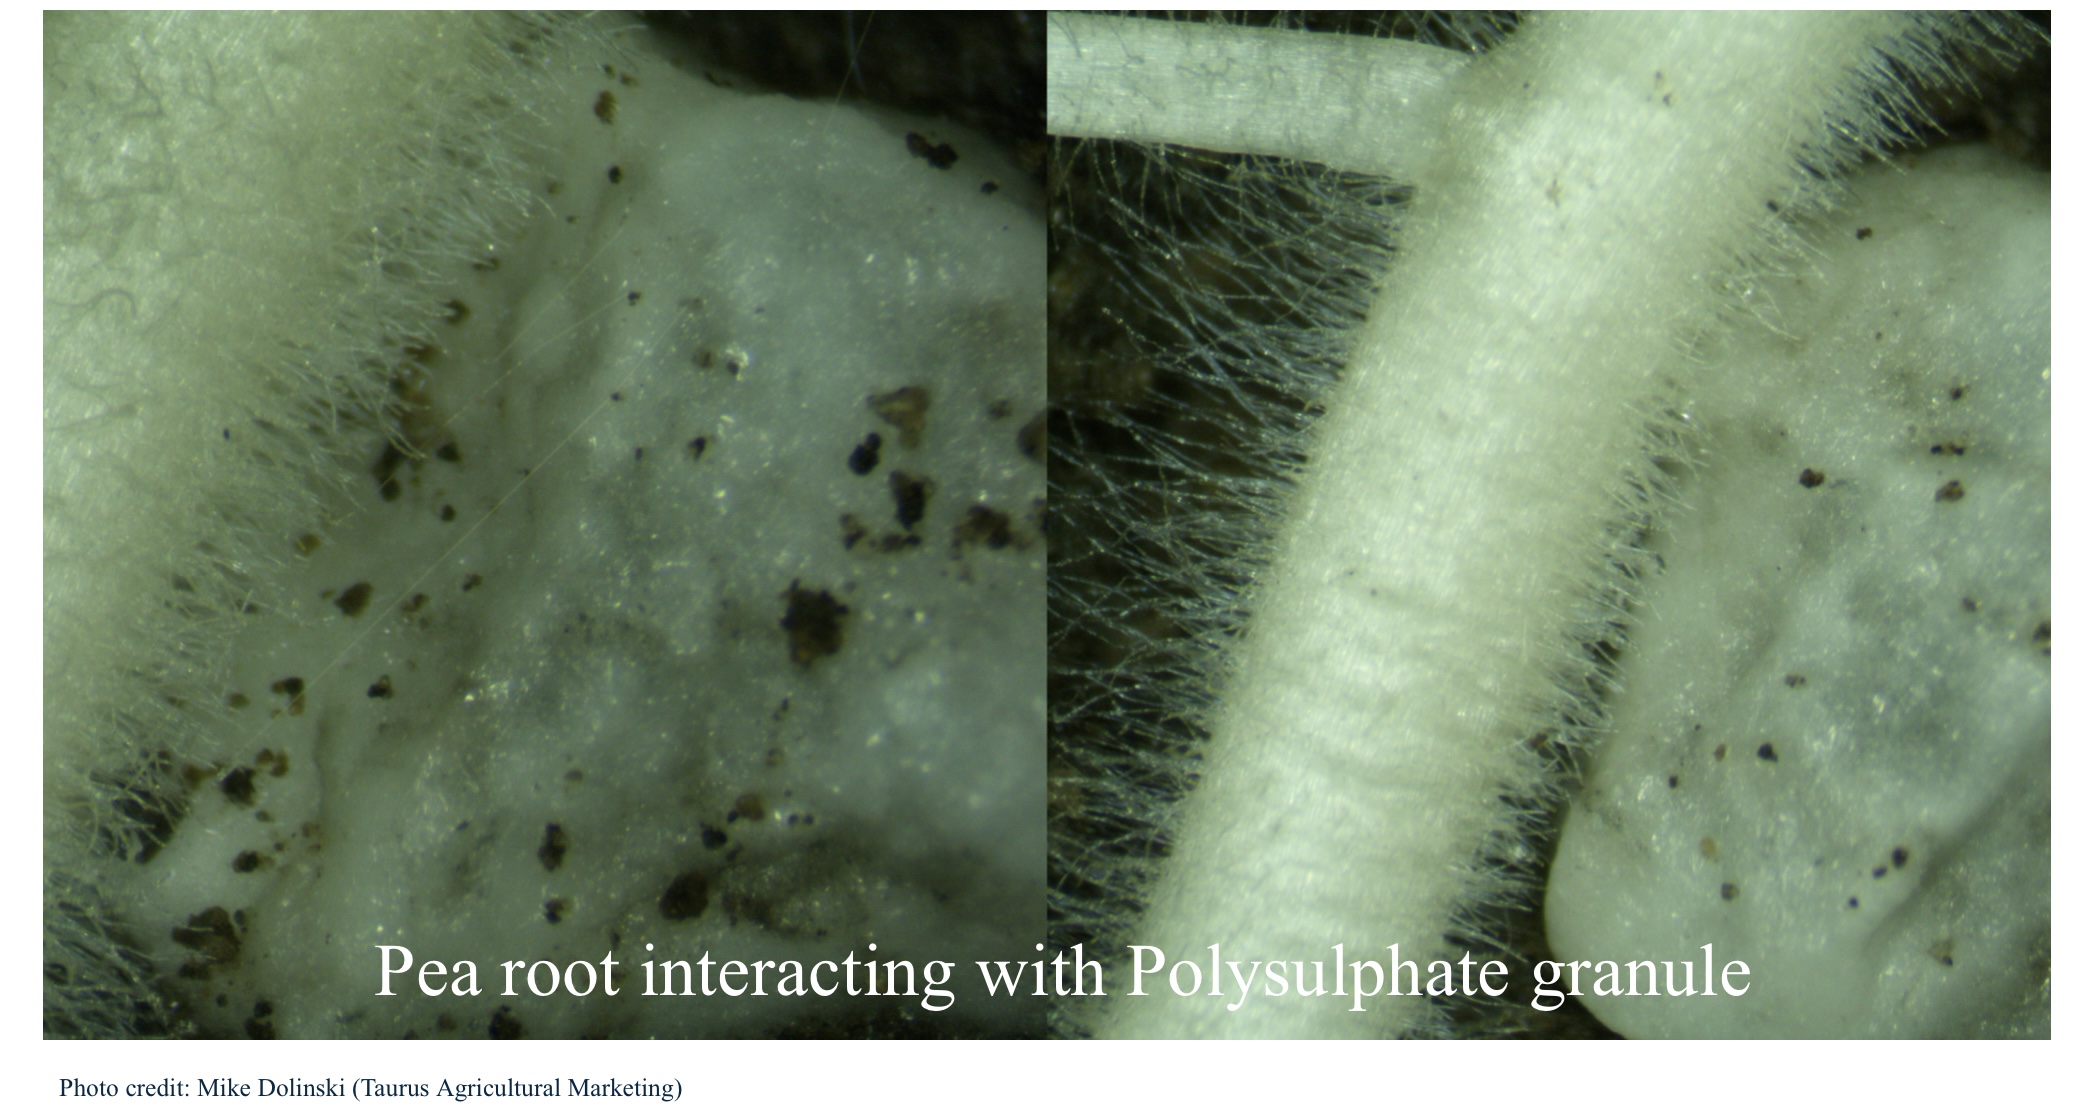 Pea root Tip interaction with poysulphate